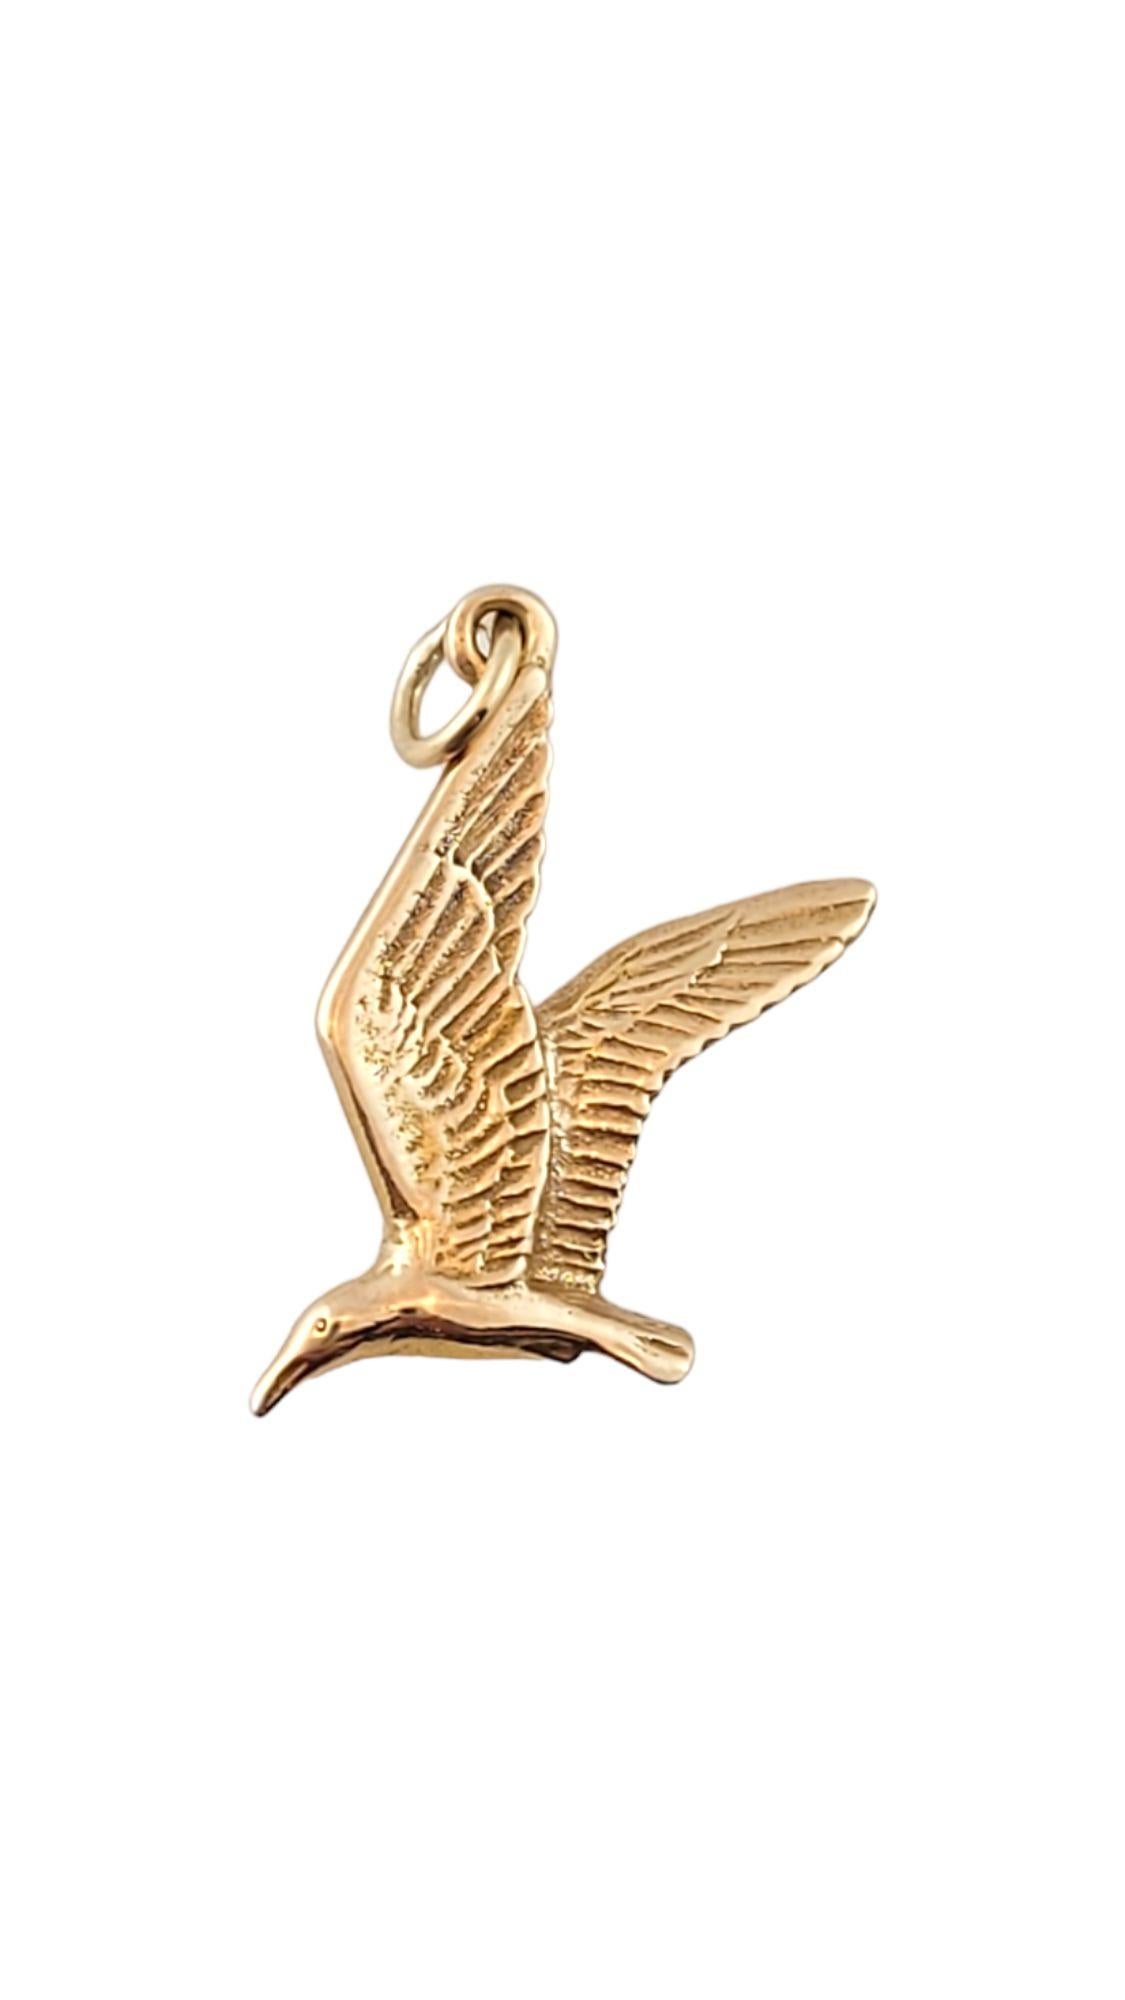 14K Yellow Gold Flying Bird Charm #14320 For Sale 1